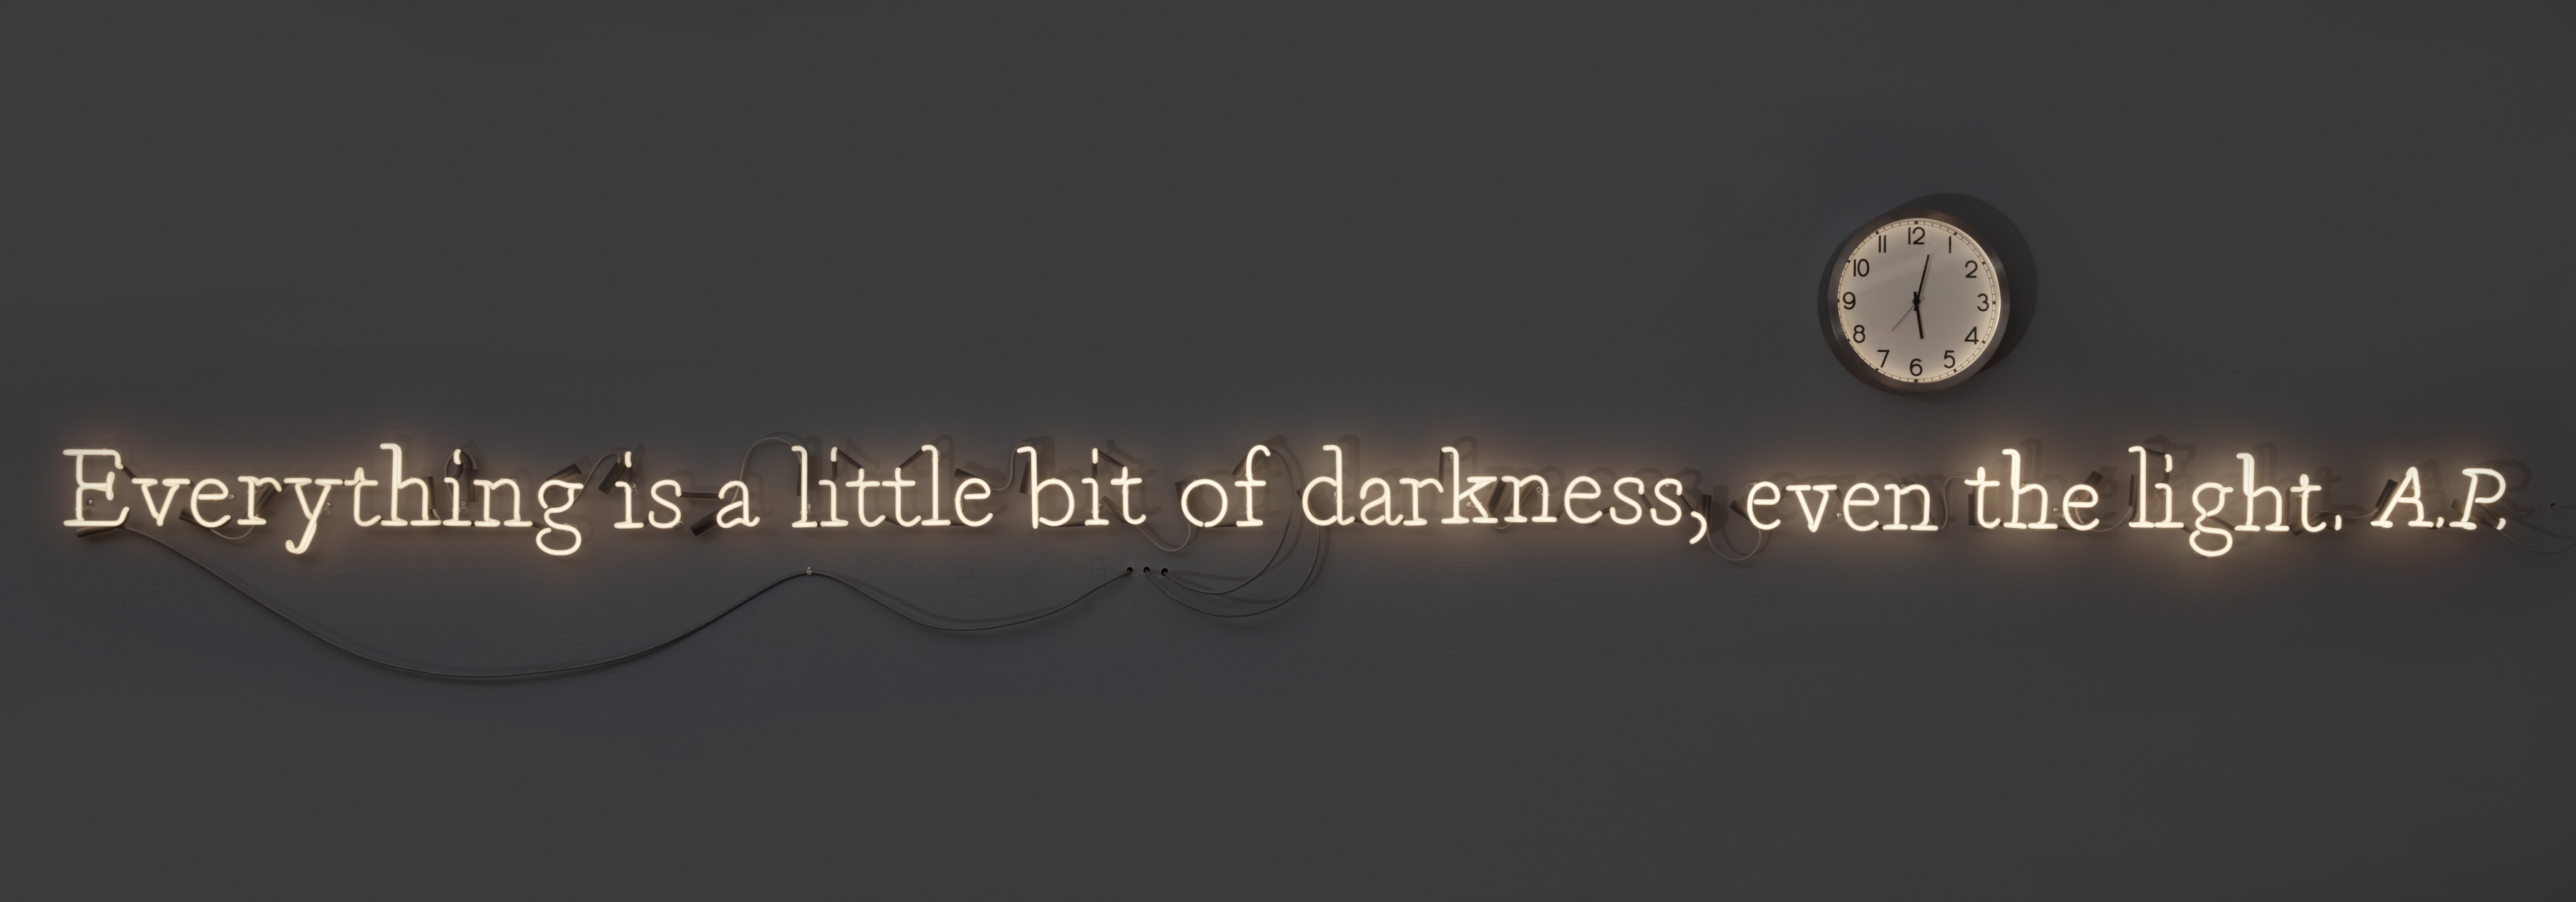 neon "everything is a little bit of darkness: